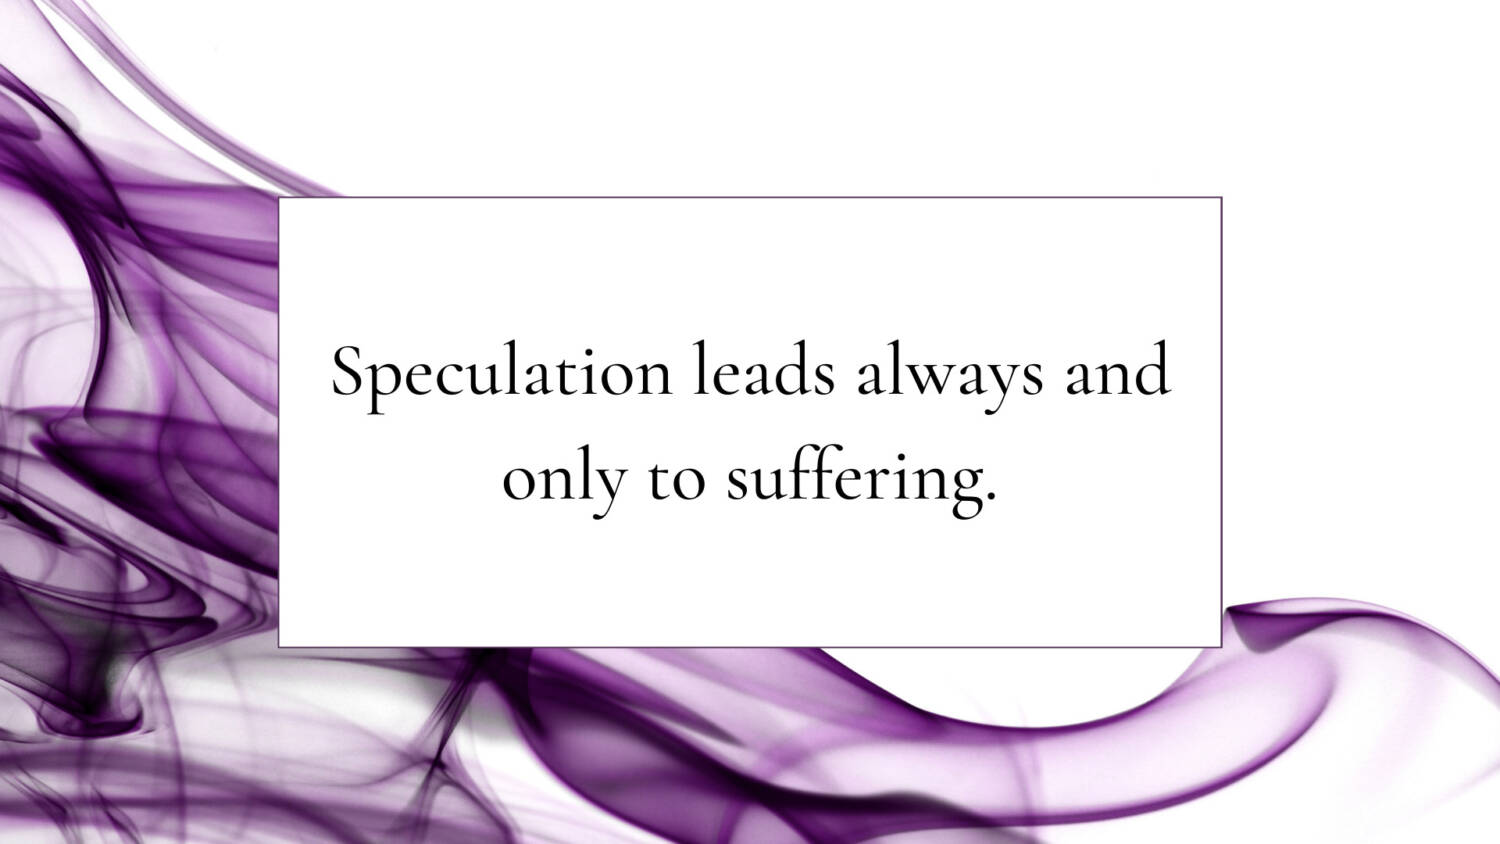 Speculation leads always and only to suffering.